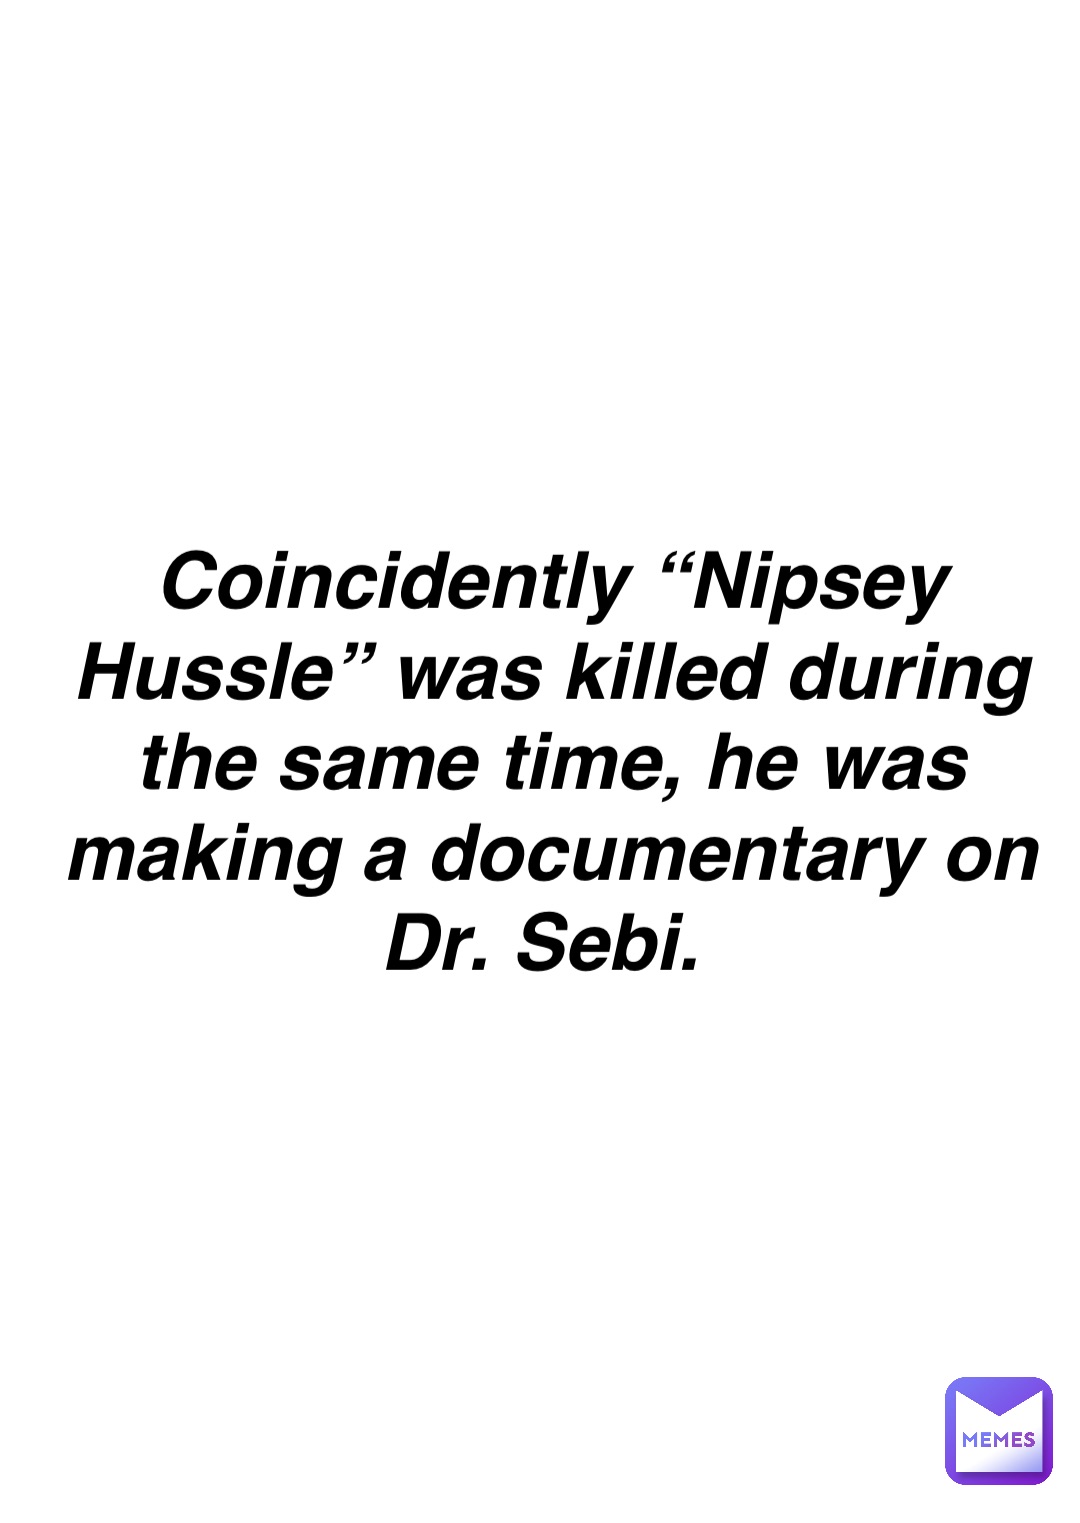 Double tap to edit Coincidently “Nipsey Hussle” was killed during the same time, he was making a documentary on Dr. Sebi.